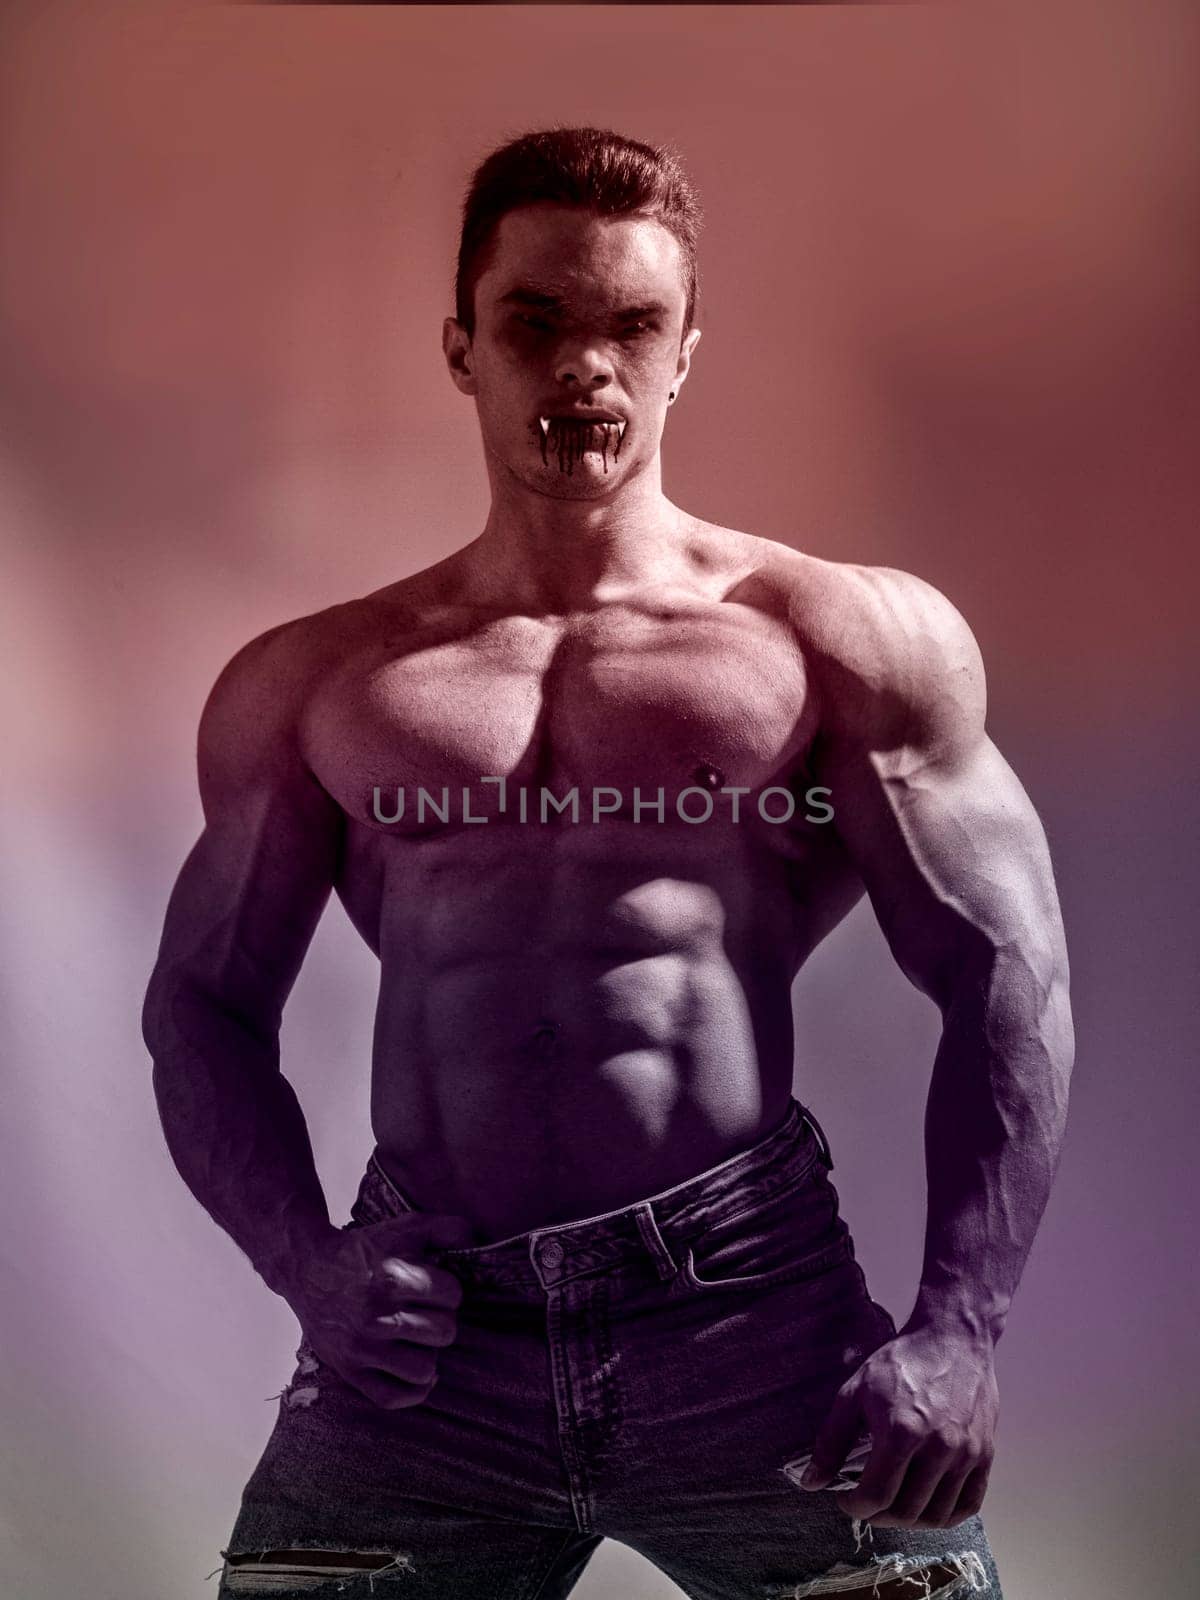 Portrait of a Young Muscular Vampire Man Shirtless by artofphoto